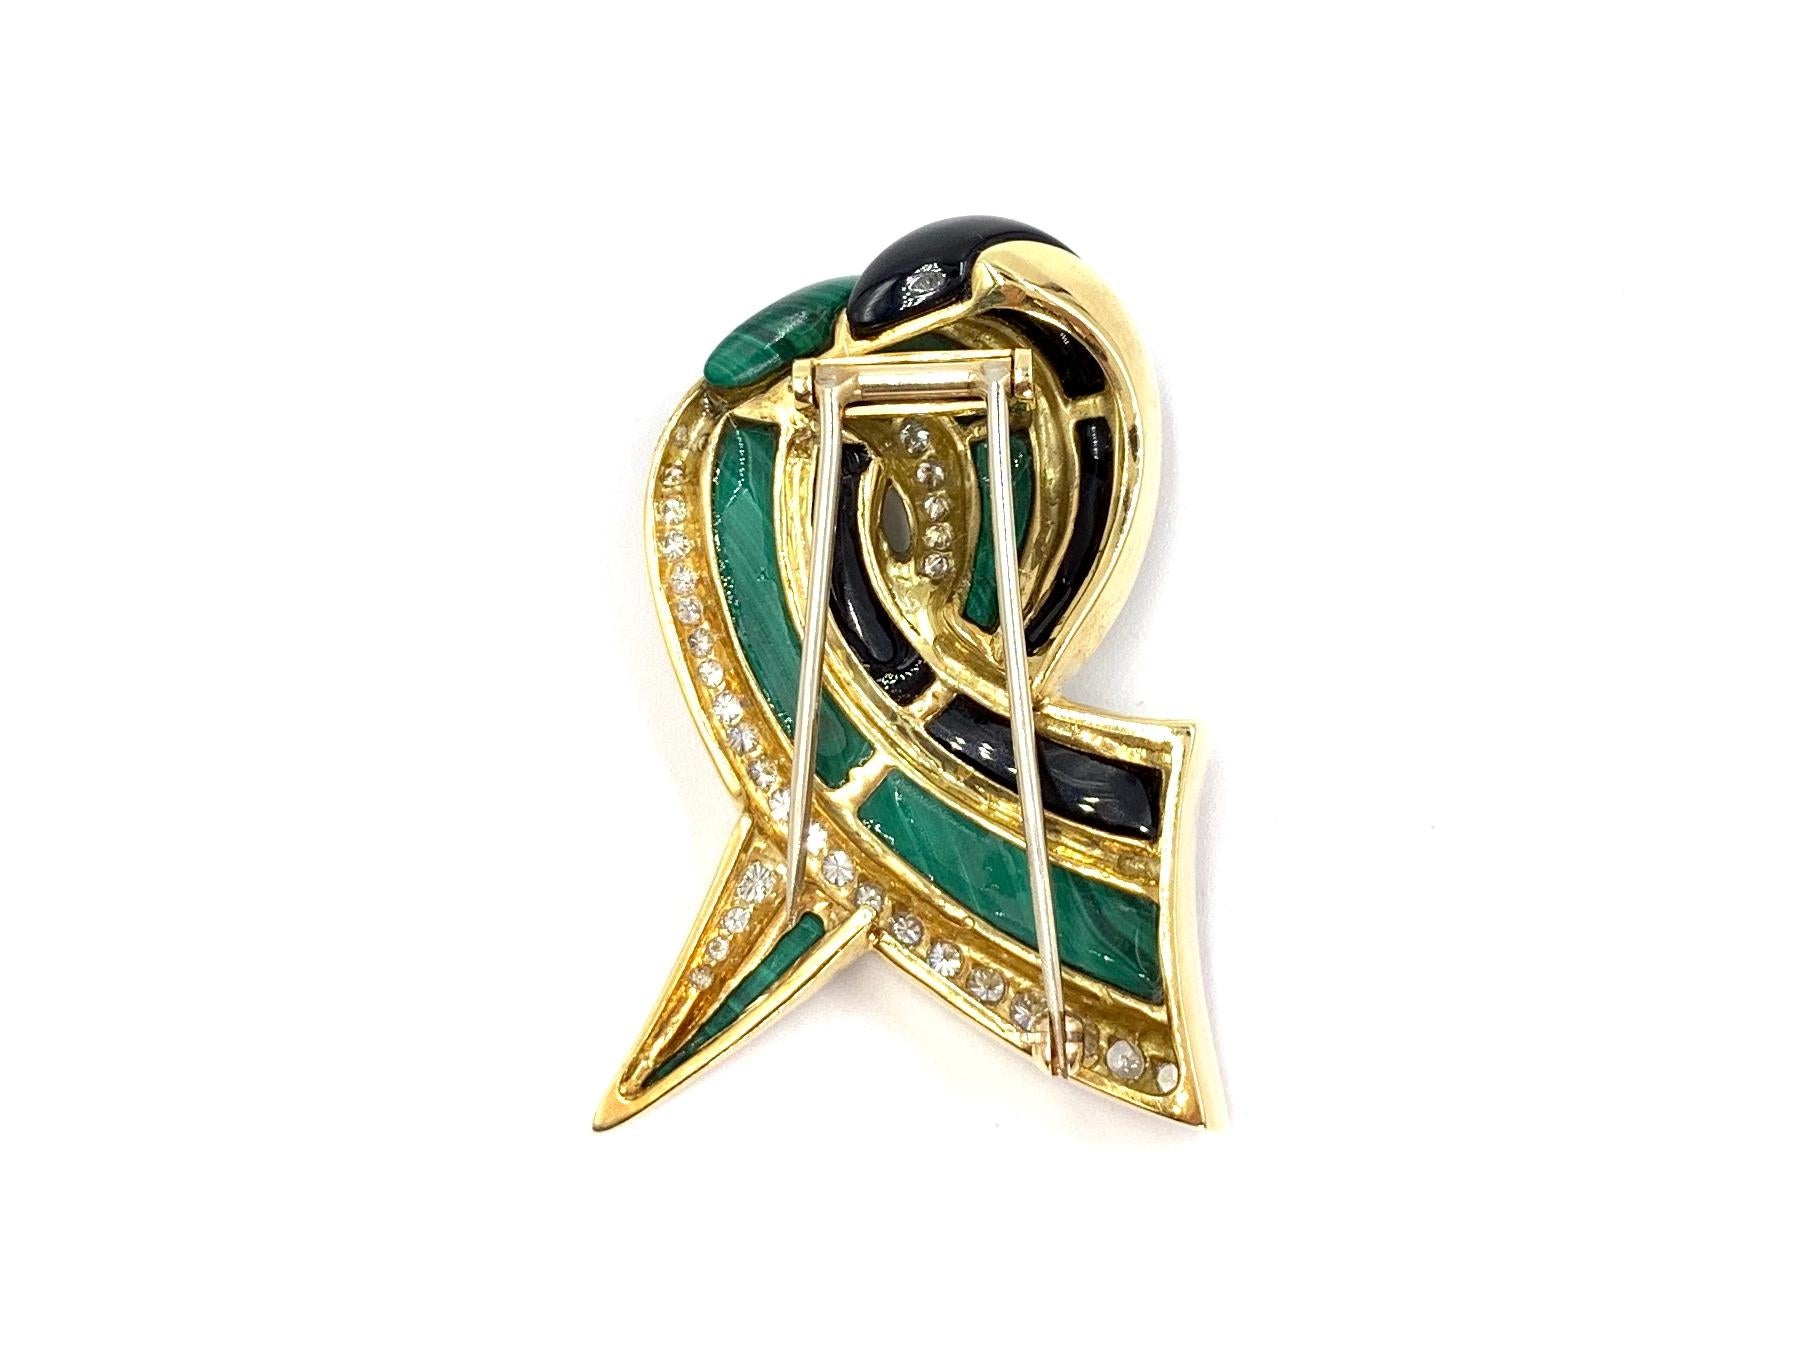 Incredibly well made by high jewelry designer, Charles Turi. This 18 karat yellow gold ribbon shaped brooch pin features beautiful striped genuine malachite, stark black polished carved onyx and exquisite white round brilliant diamonds. Diamond